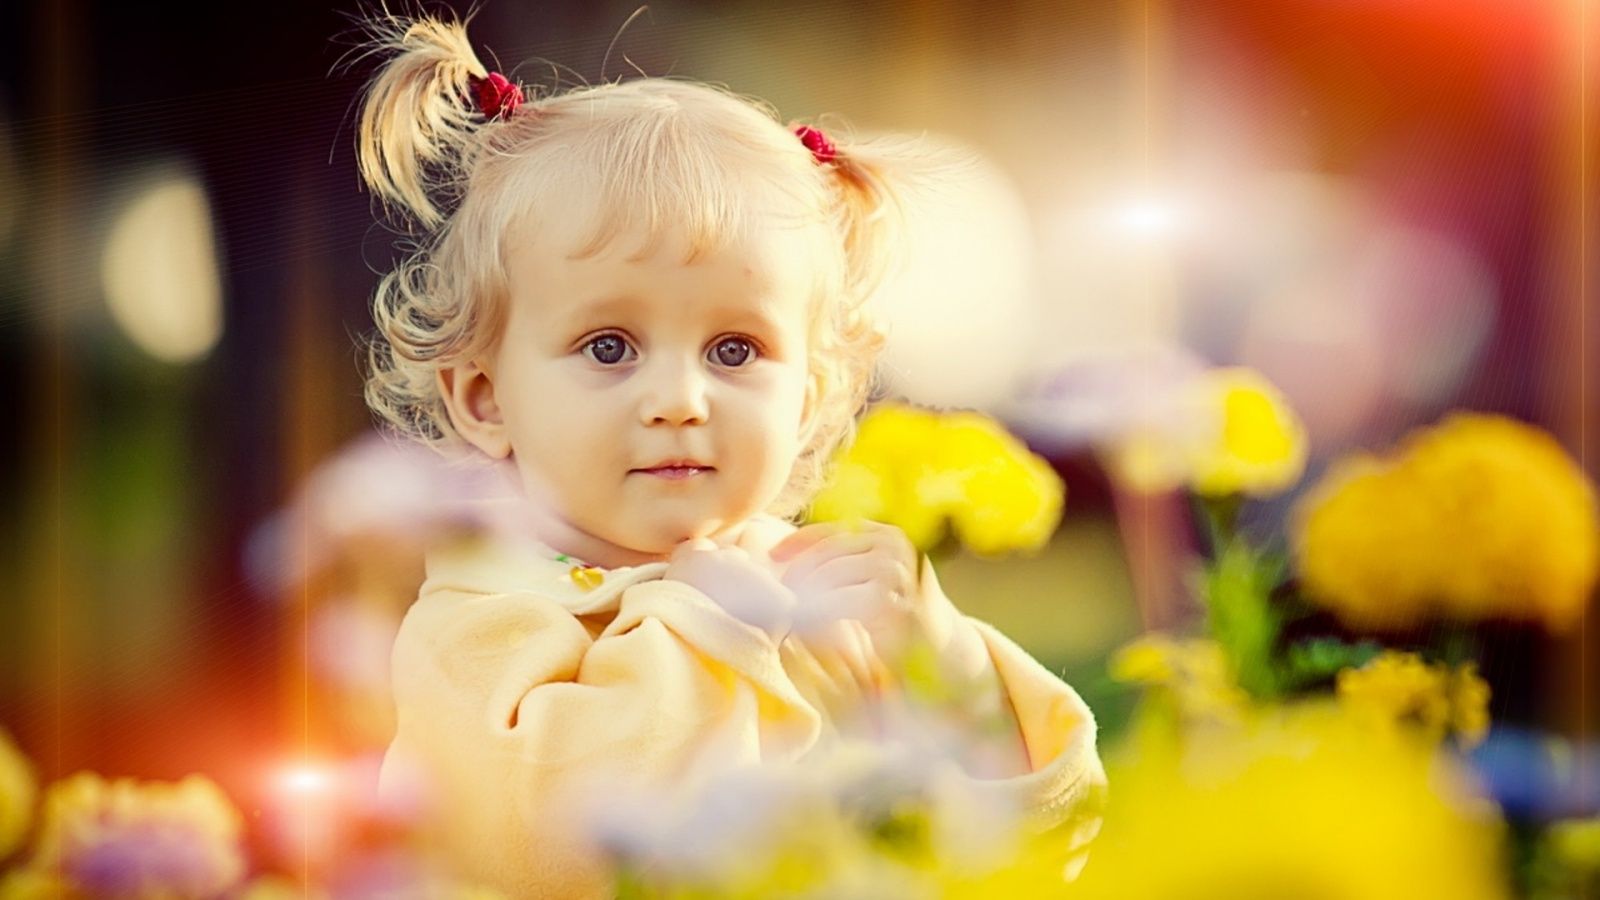 most beautiful baby girl wallpapers 89 | a2zHDWallpapers